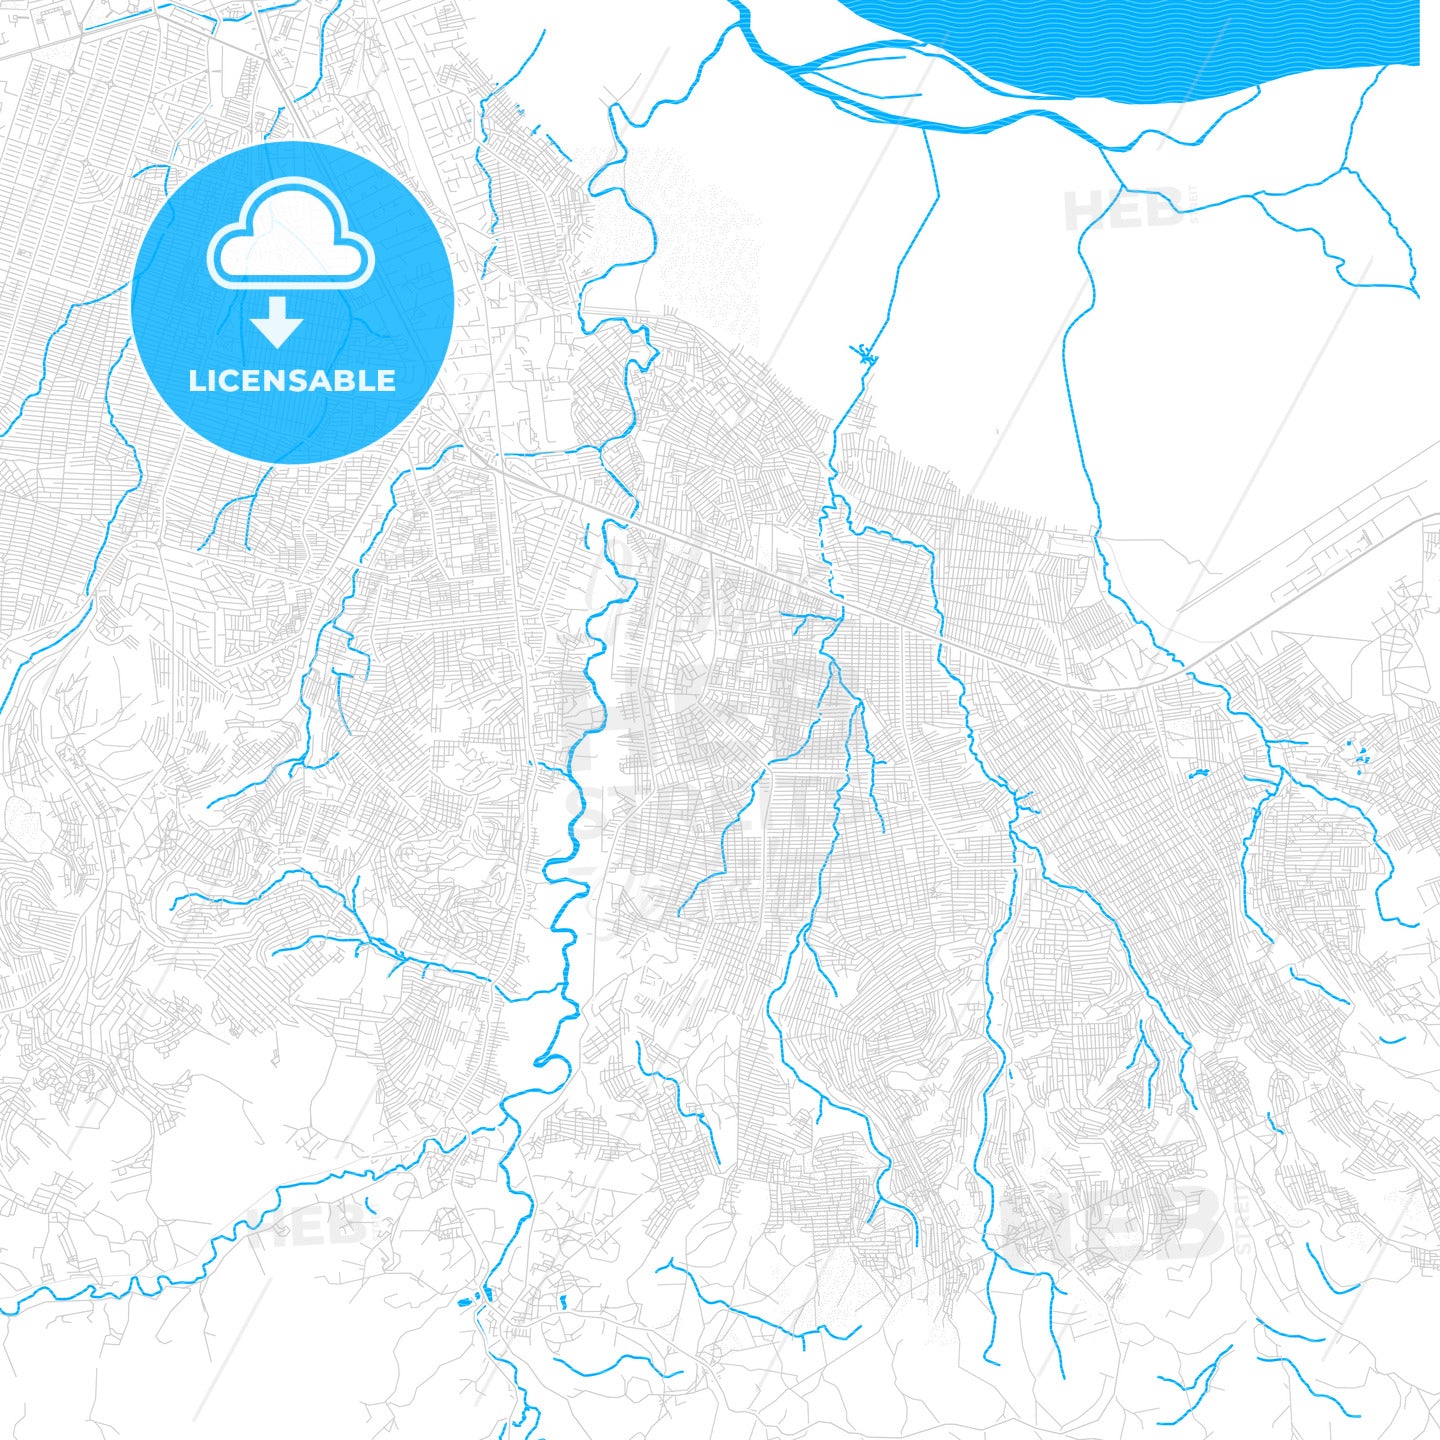 Masina, DR Congo PDF vector map with water in focus